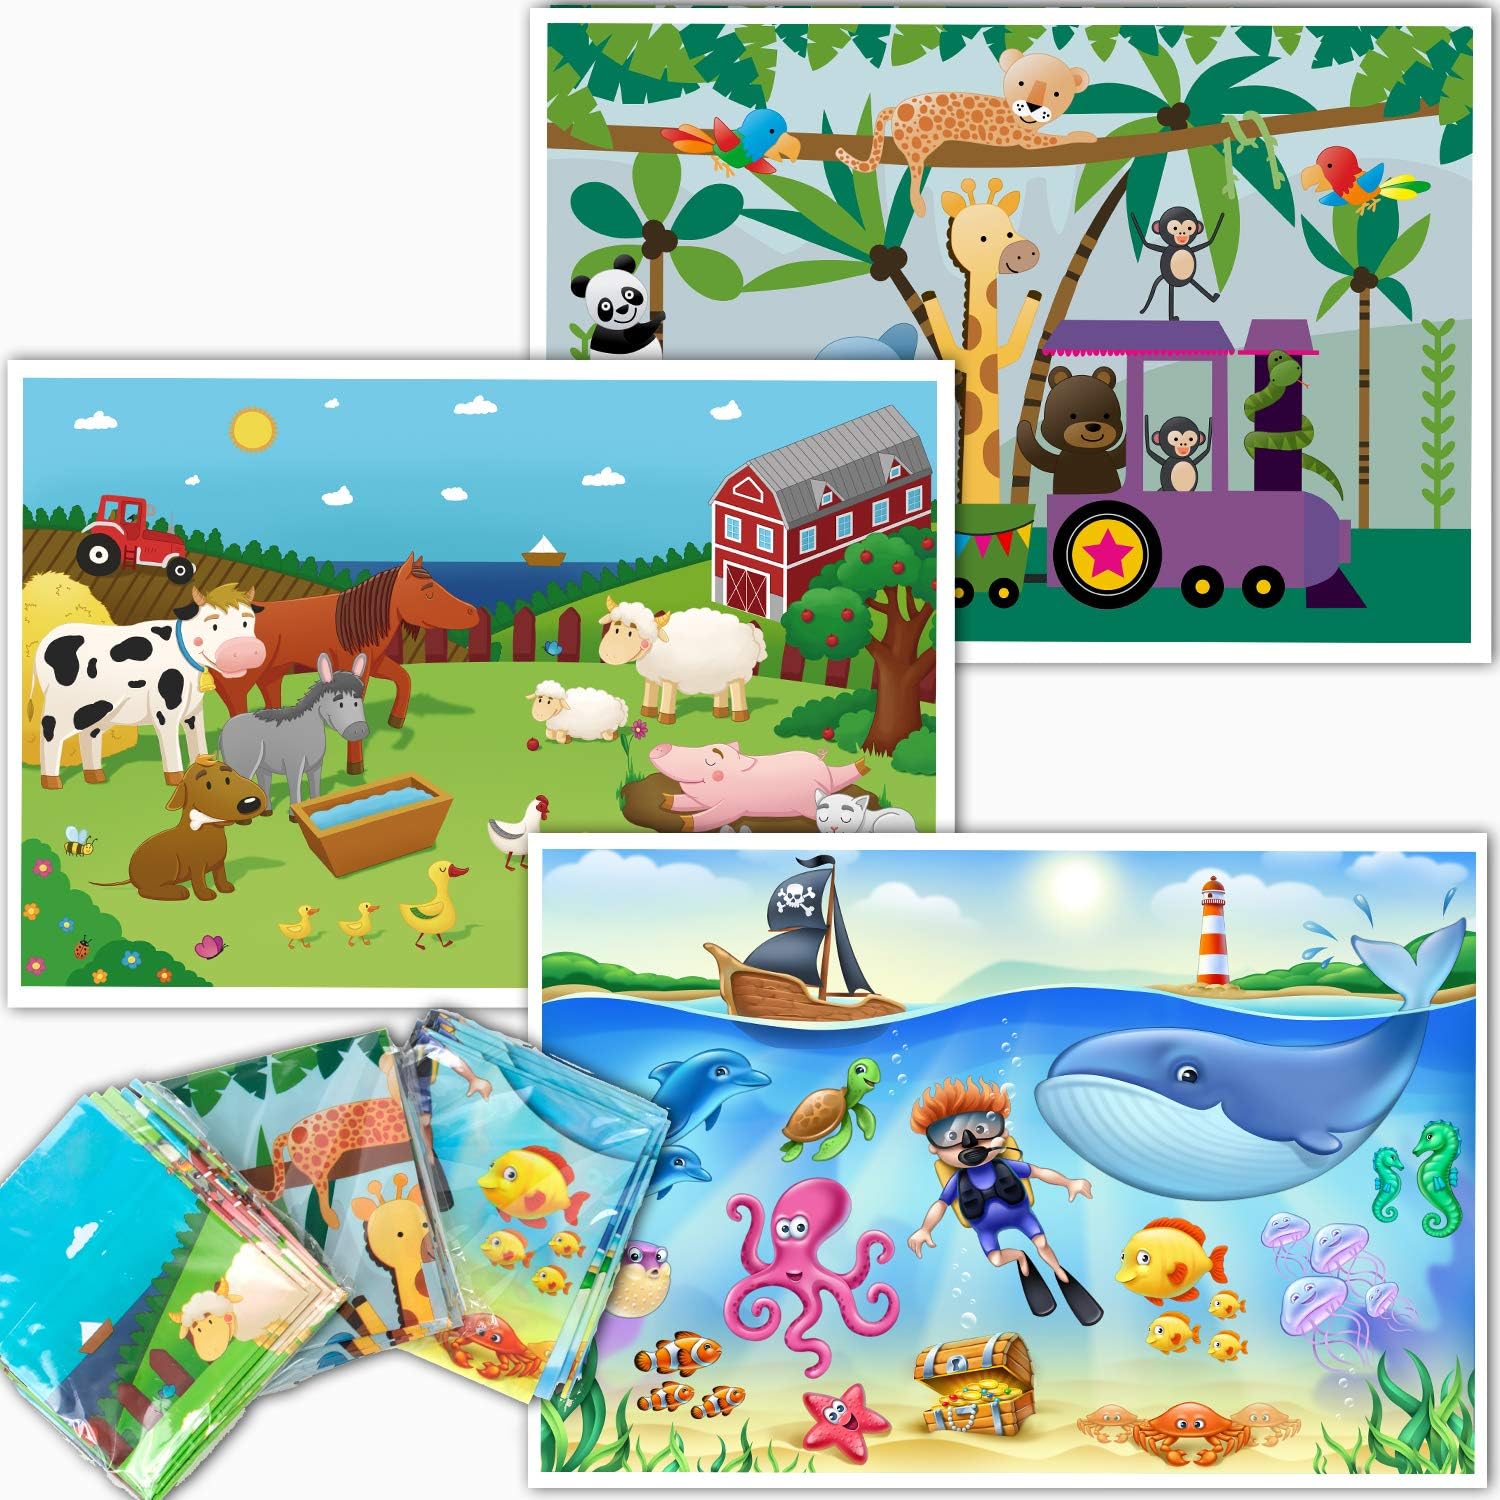 Bulk 40 Pcs Adorable Animal Design Disposable Toddler Placemats, Perfect for Baby Dining and Party Gifting Wholesale